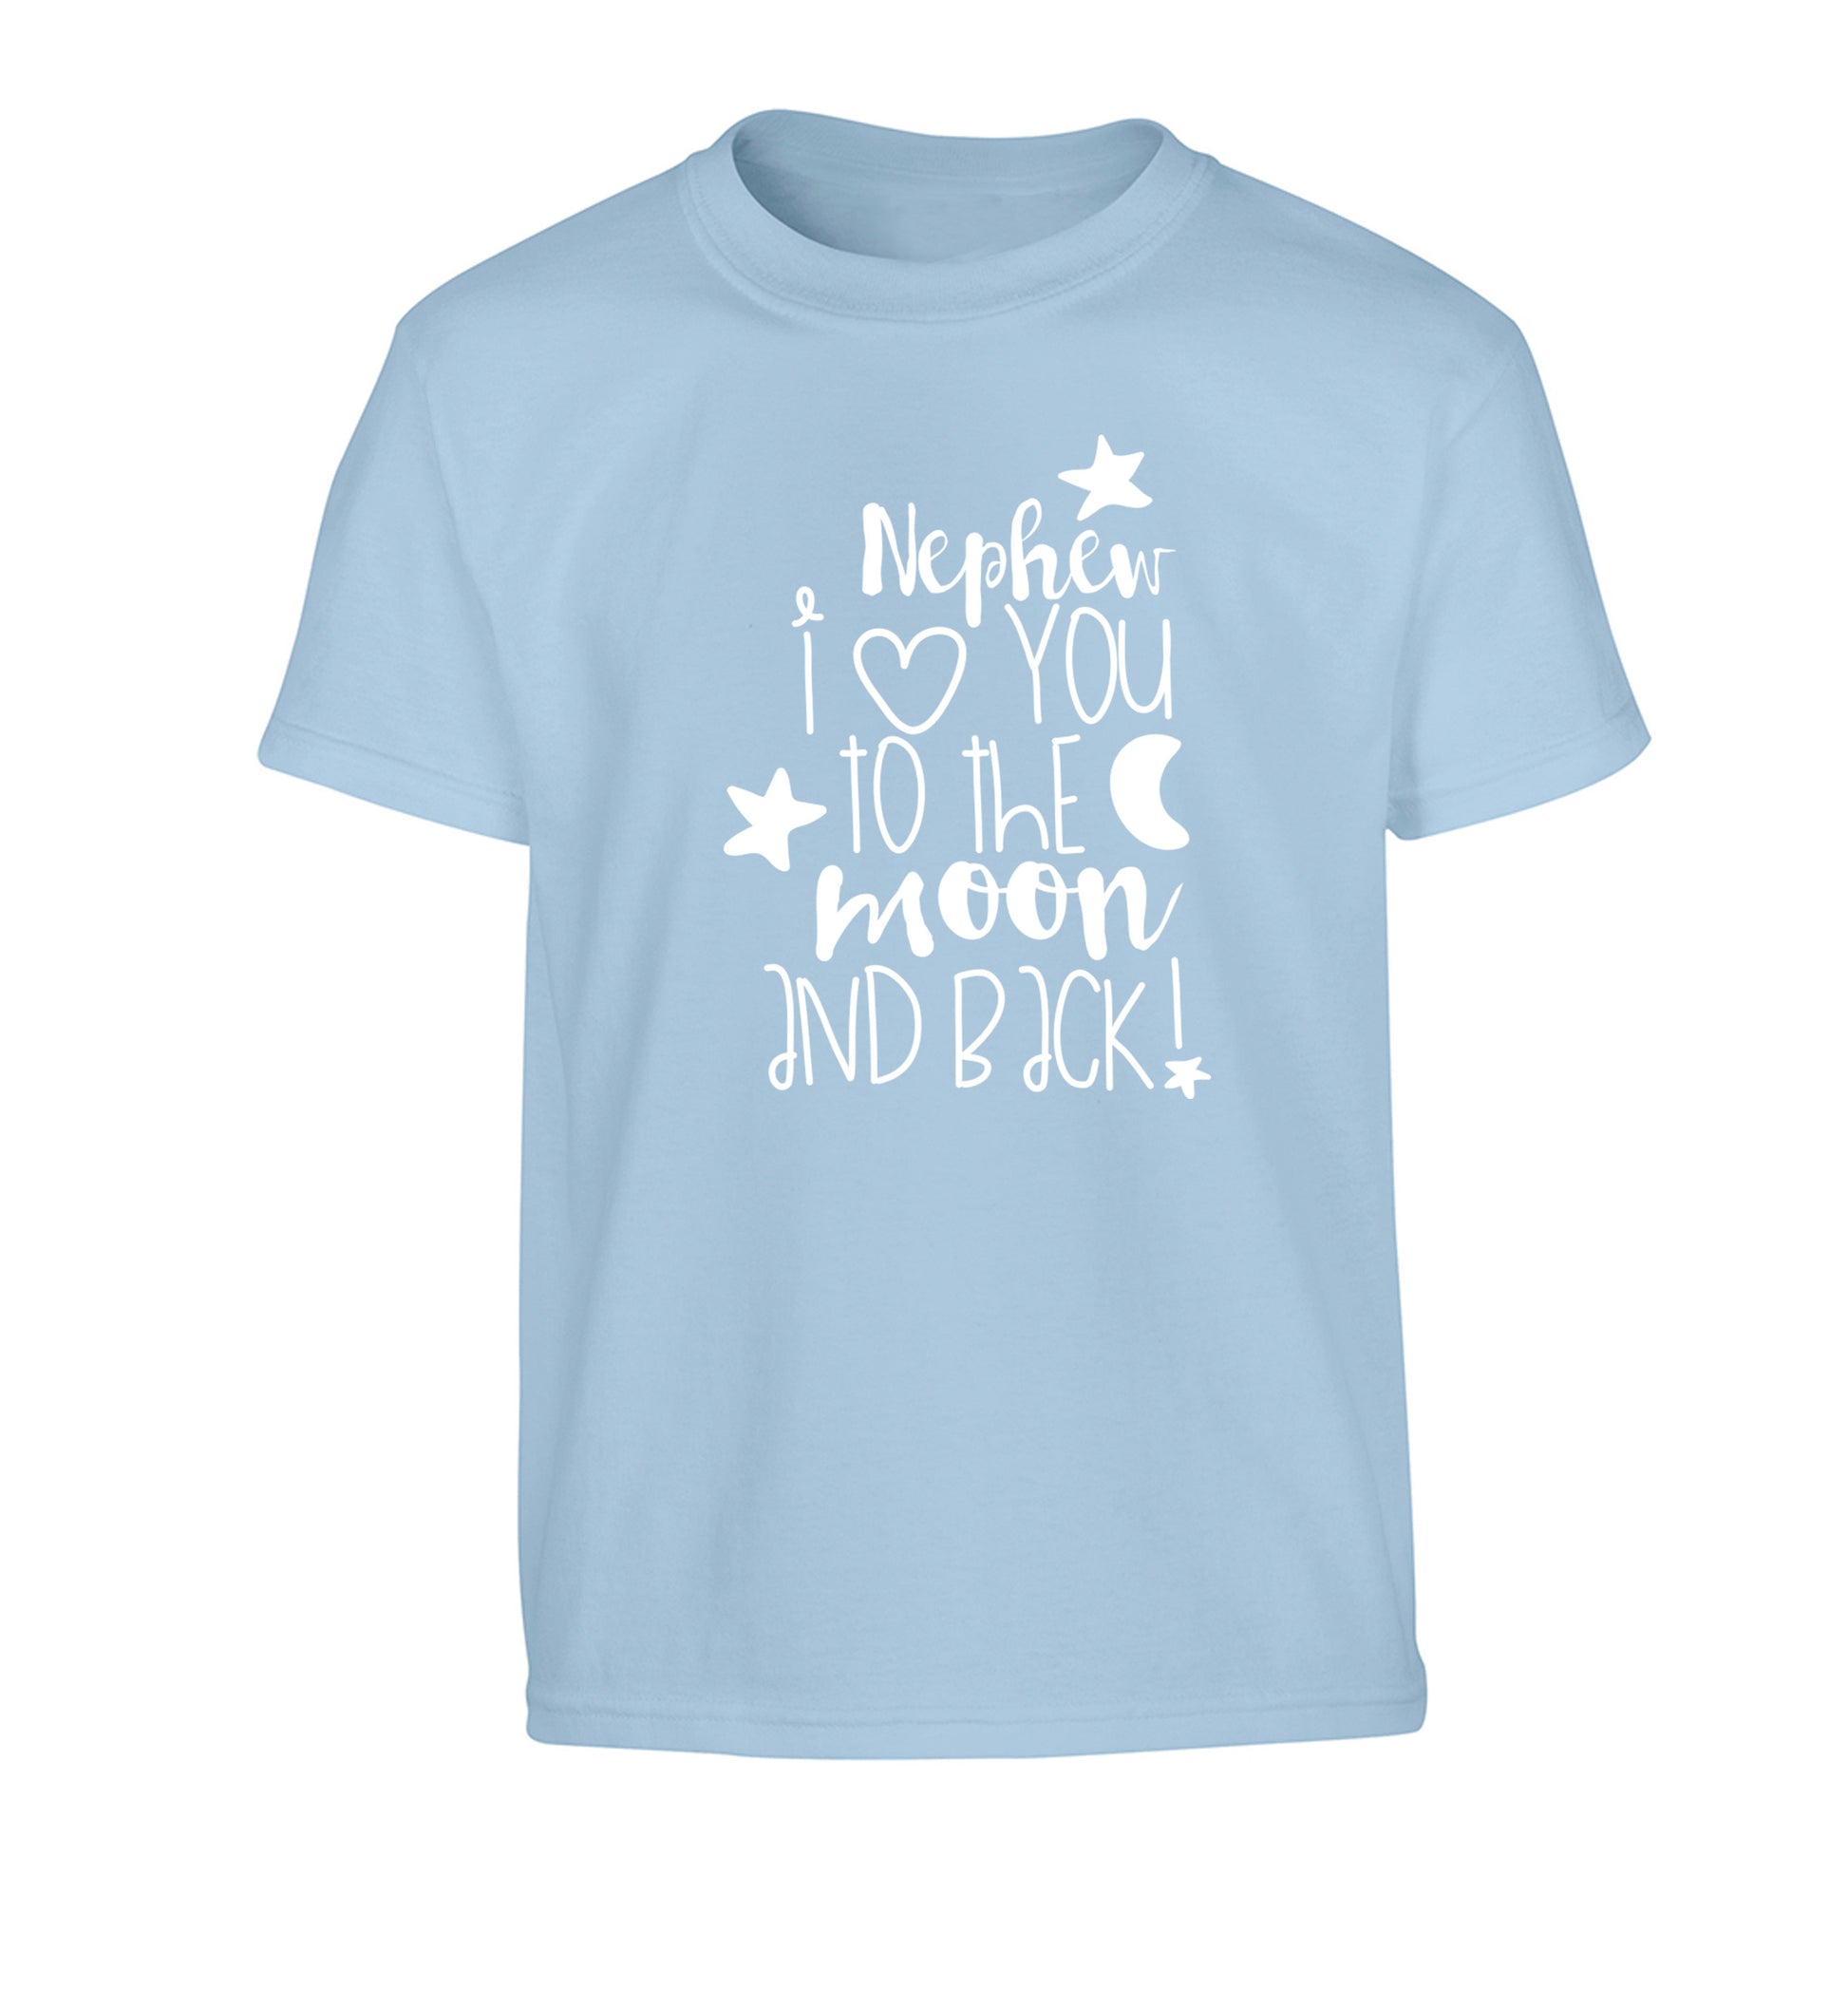 Nephew I love you to the moon and back Children's light blue Tshirt 12-14 Years